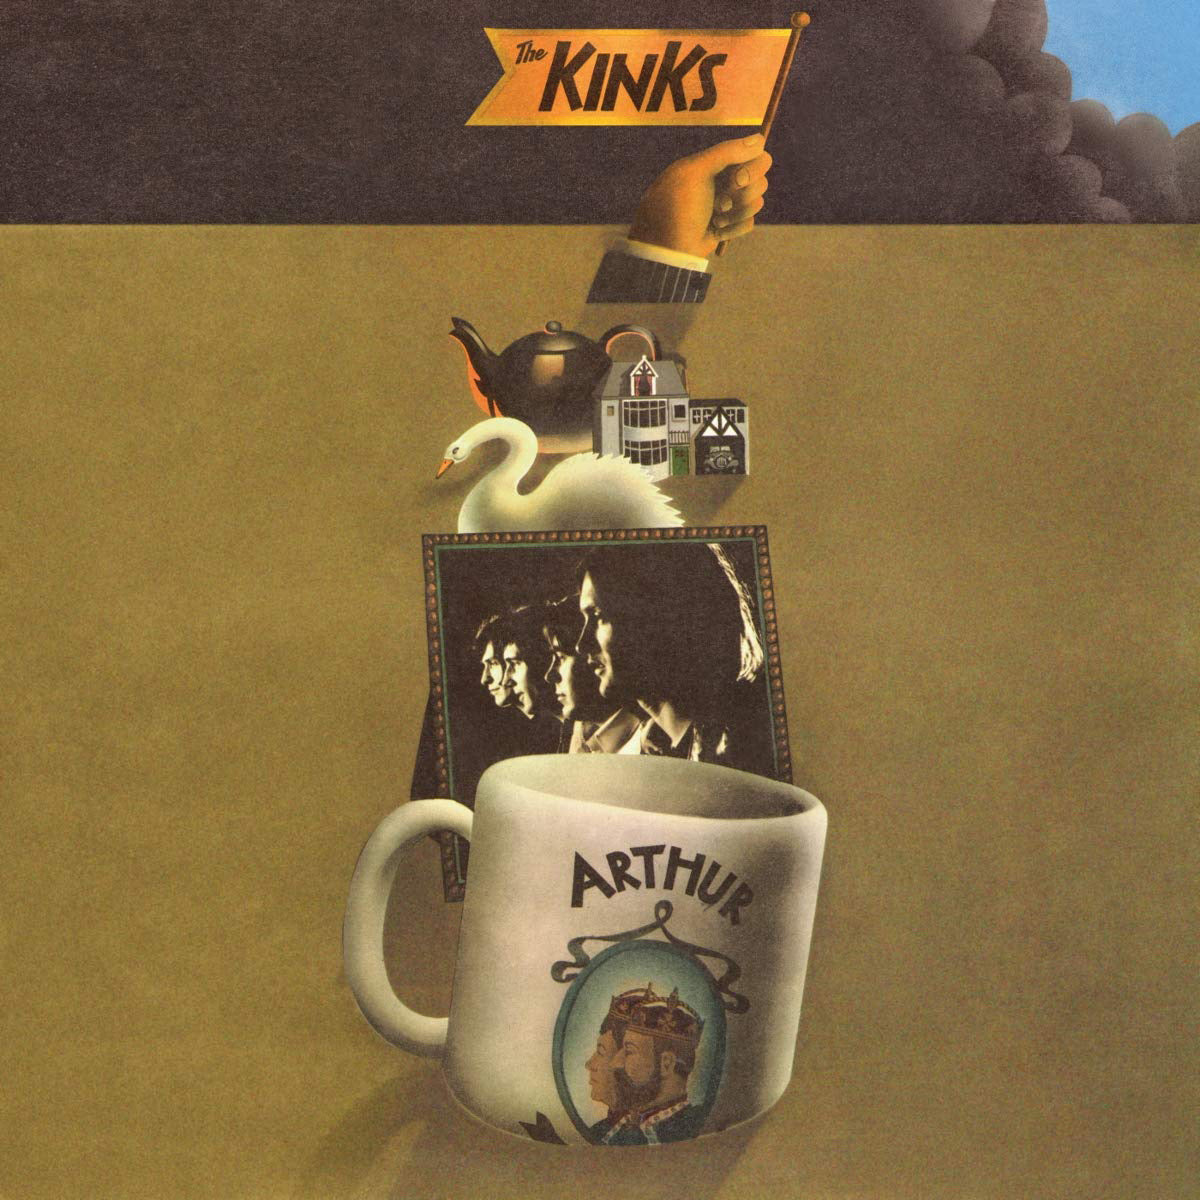 The Kinks - Arthur Or The Decline And Fall Of The British Empire (50th Anniversary Edition)